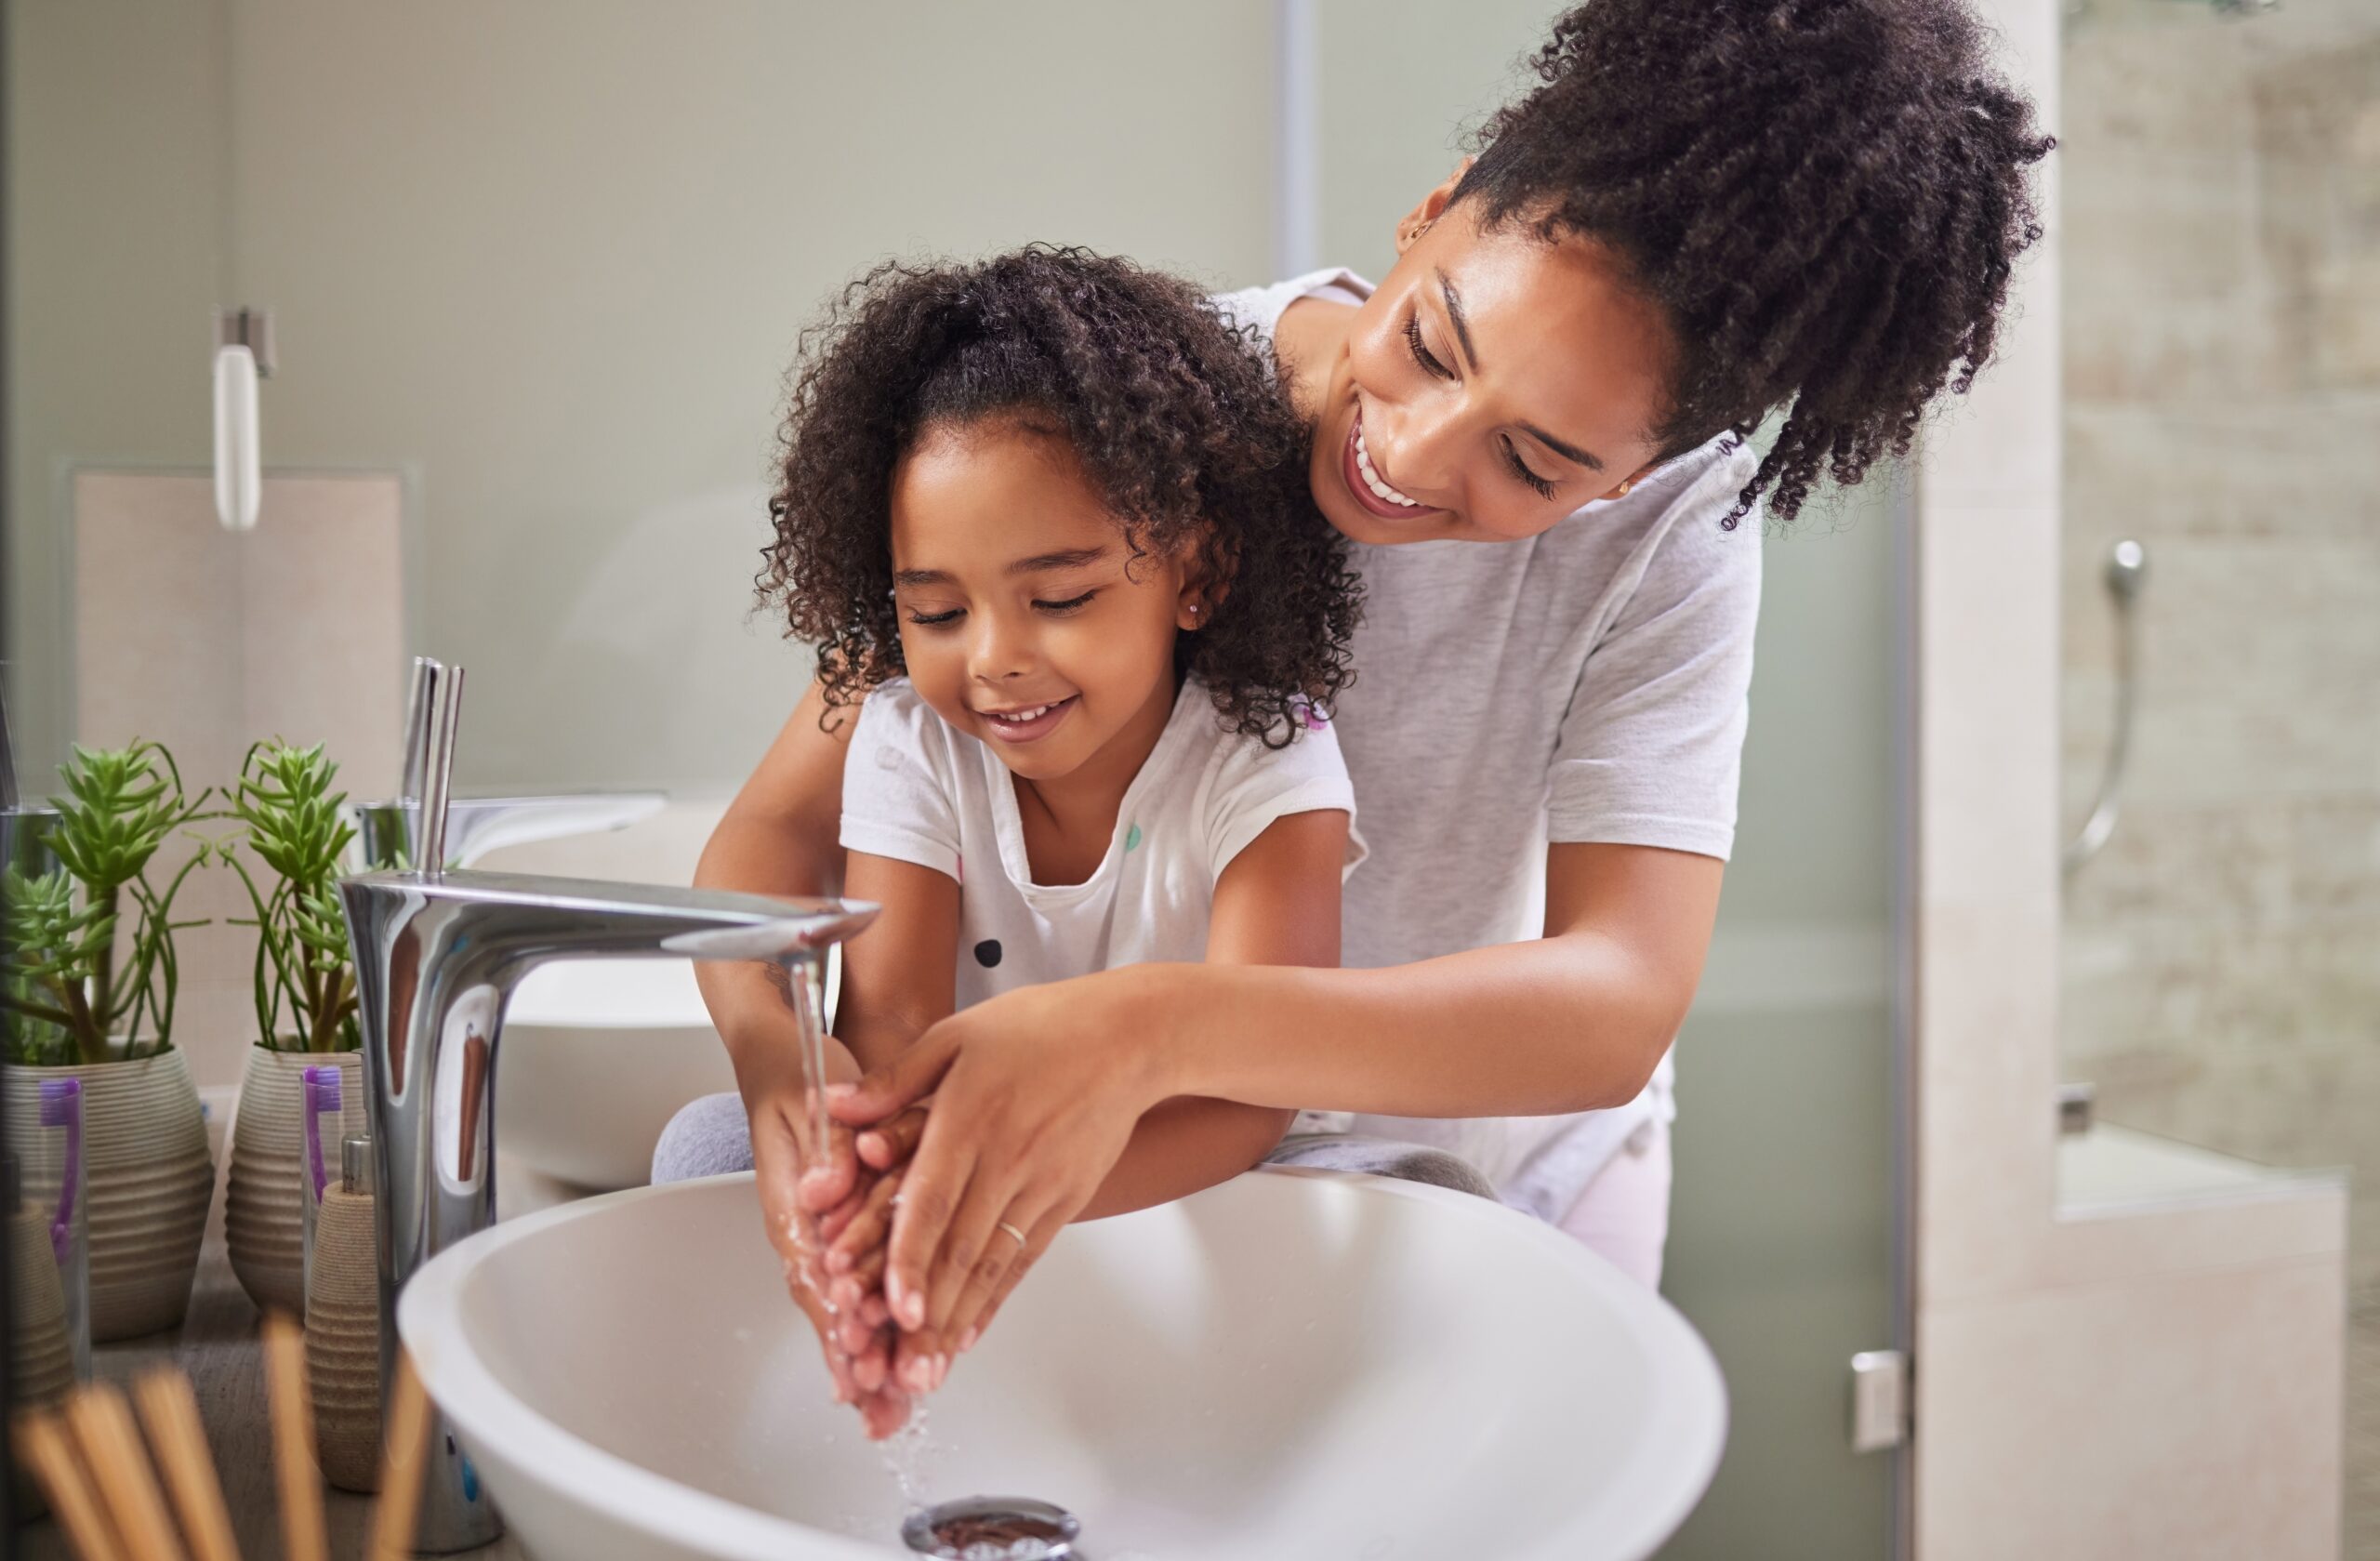 Mother helping daughter wash hands